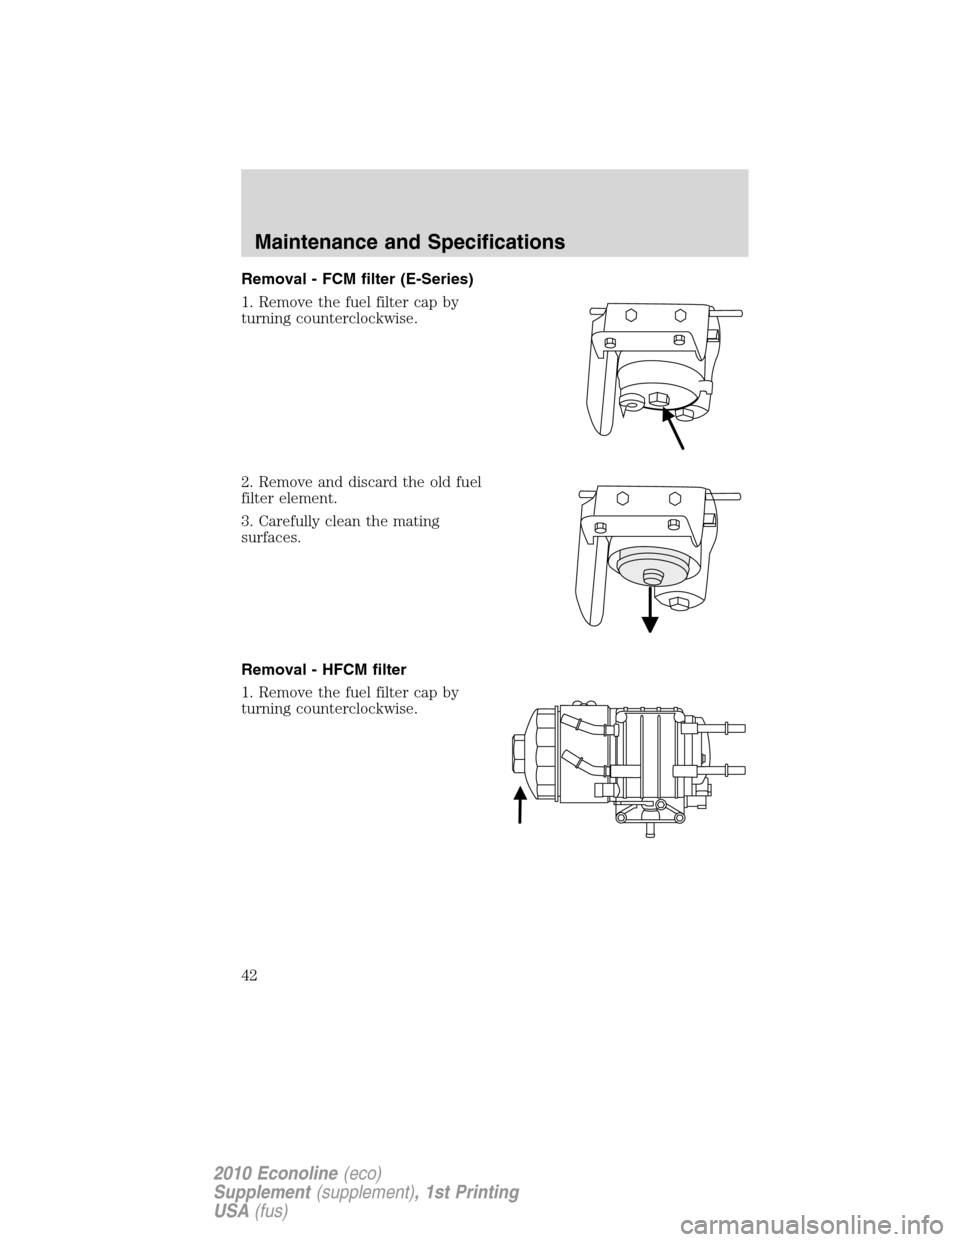 FORD SUPER DUTY 2010 2.G Diesel Supplement Manual Removal - FCM filter (E-Series)
1. Remove the fuel filter cap by
turning counterclockwise.
2. Remove and discard the old fuel
filter element.
3. Carefully clean the mating
surfaces.
Removal - HFCM fil